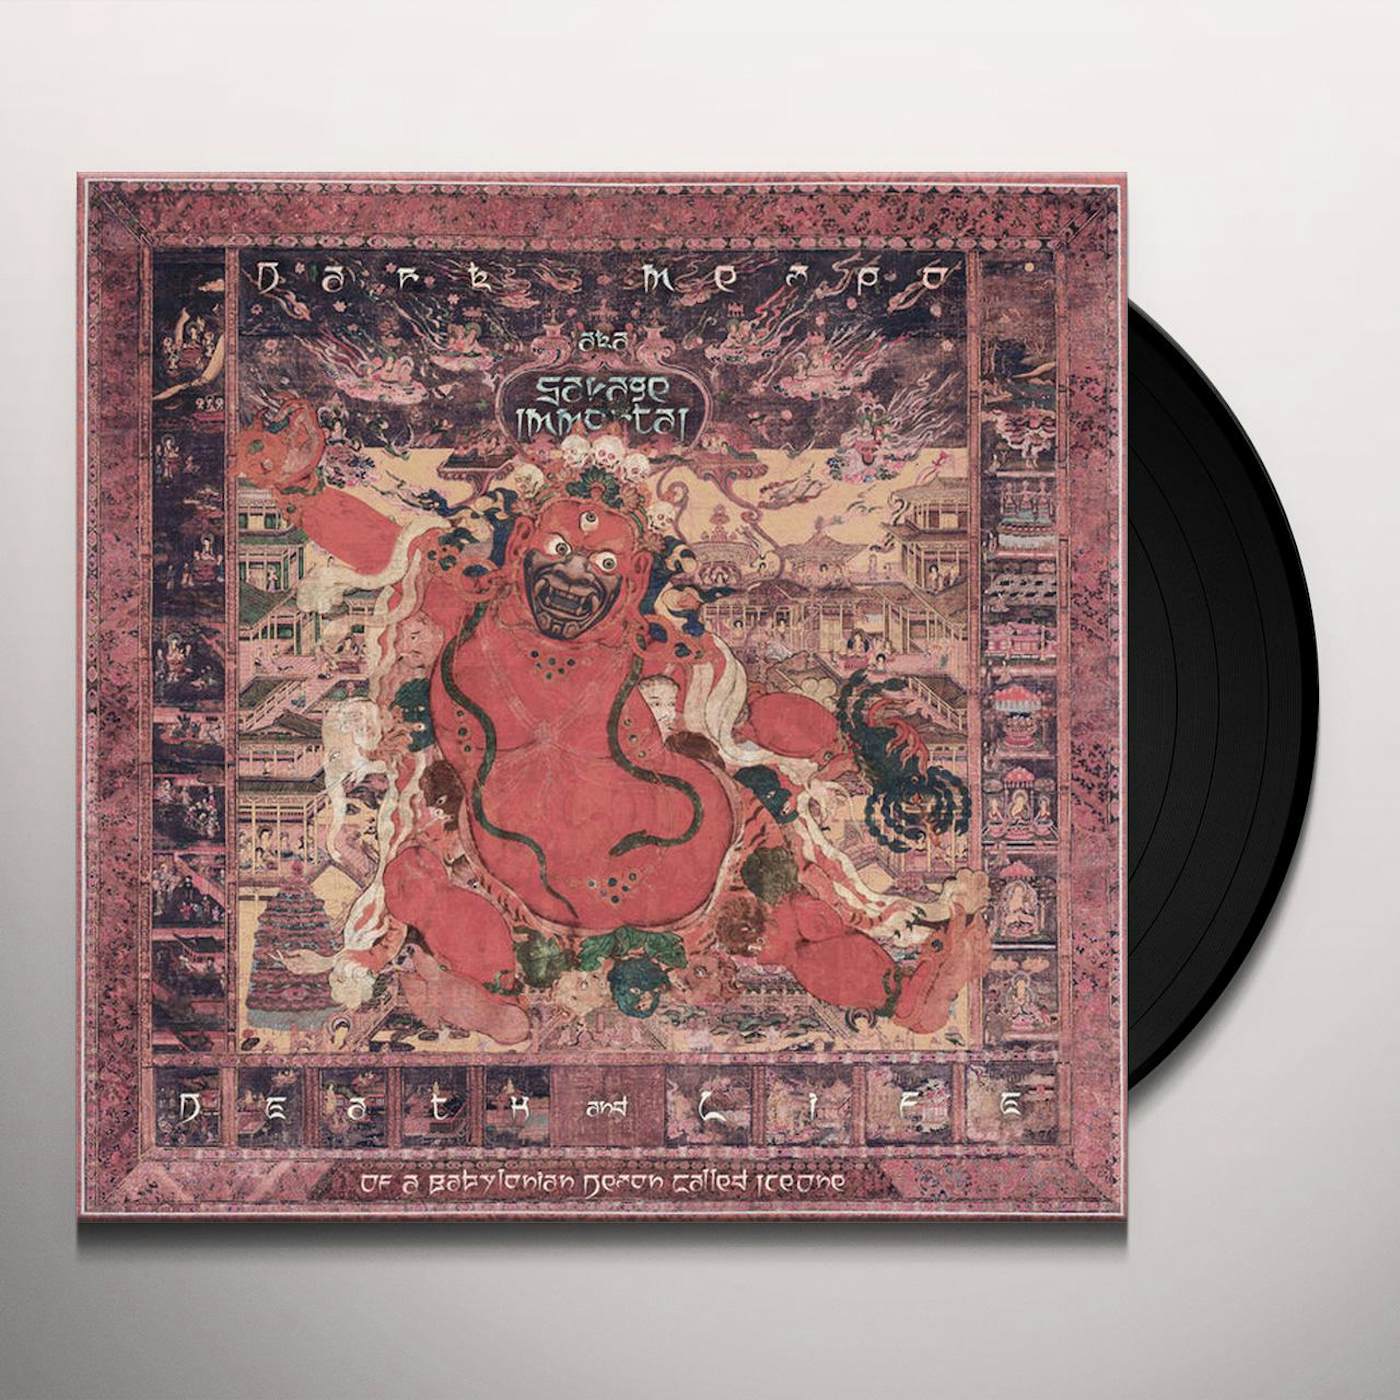 Death And Life Of A Babylonian Demon Called Ice One Vinyl Record